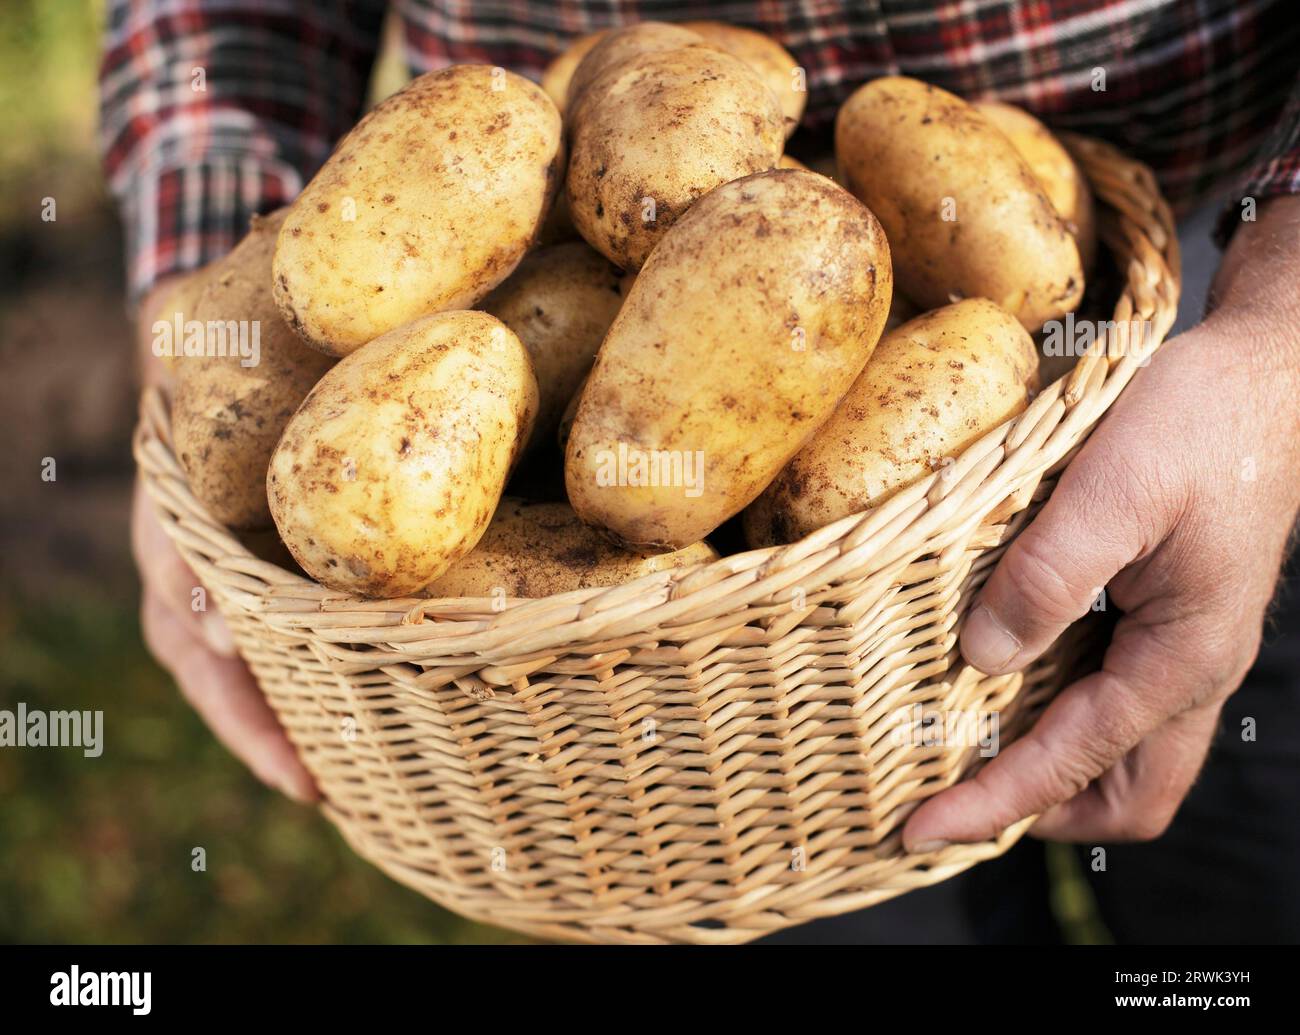 Hands holding a wicker basket full with fresh harvested potatoes Stock Photo